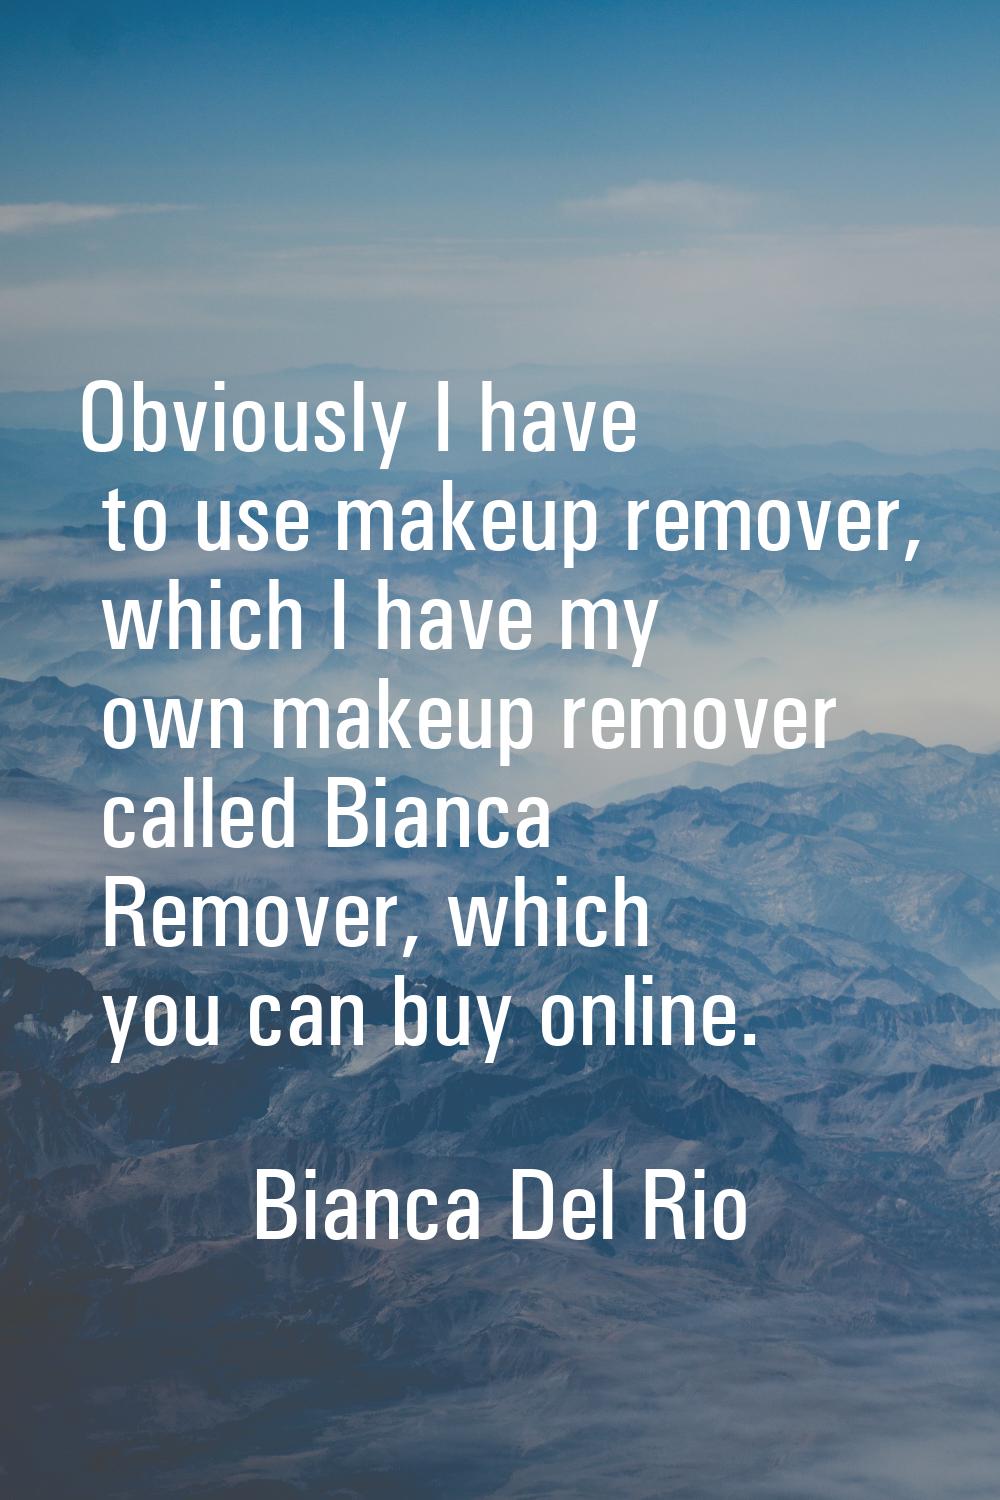 Obviously I have to use makeup remover, which I have my own makeup remover called Bianca Remover, w